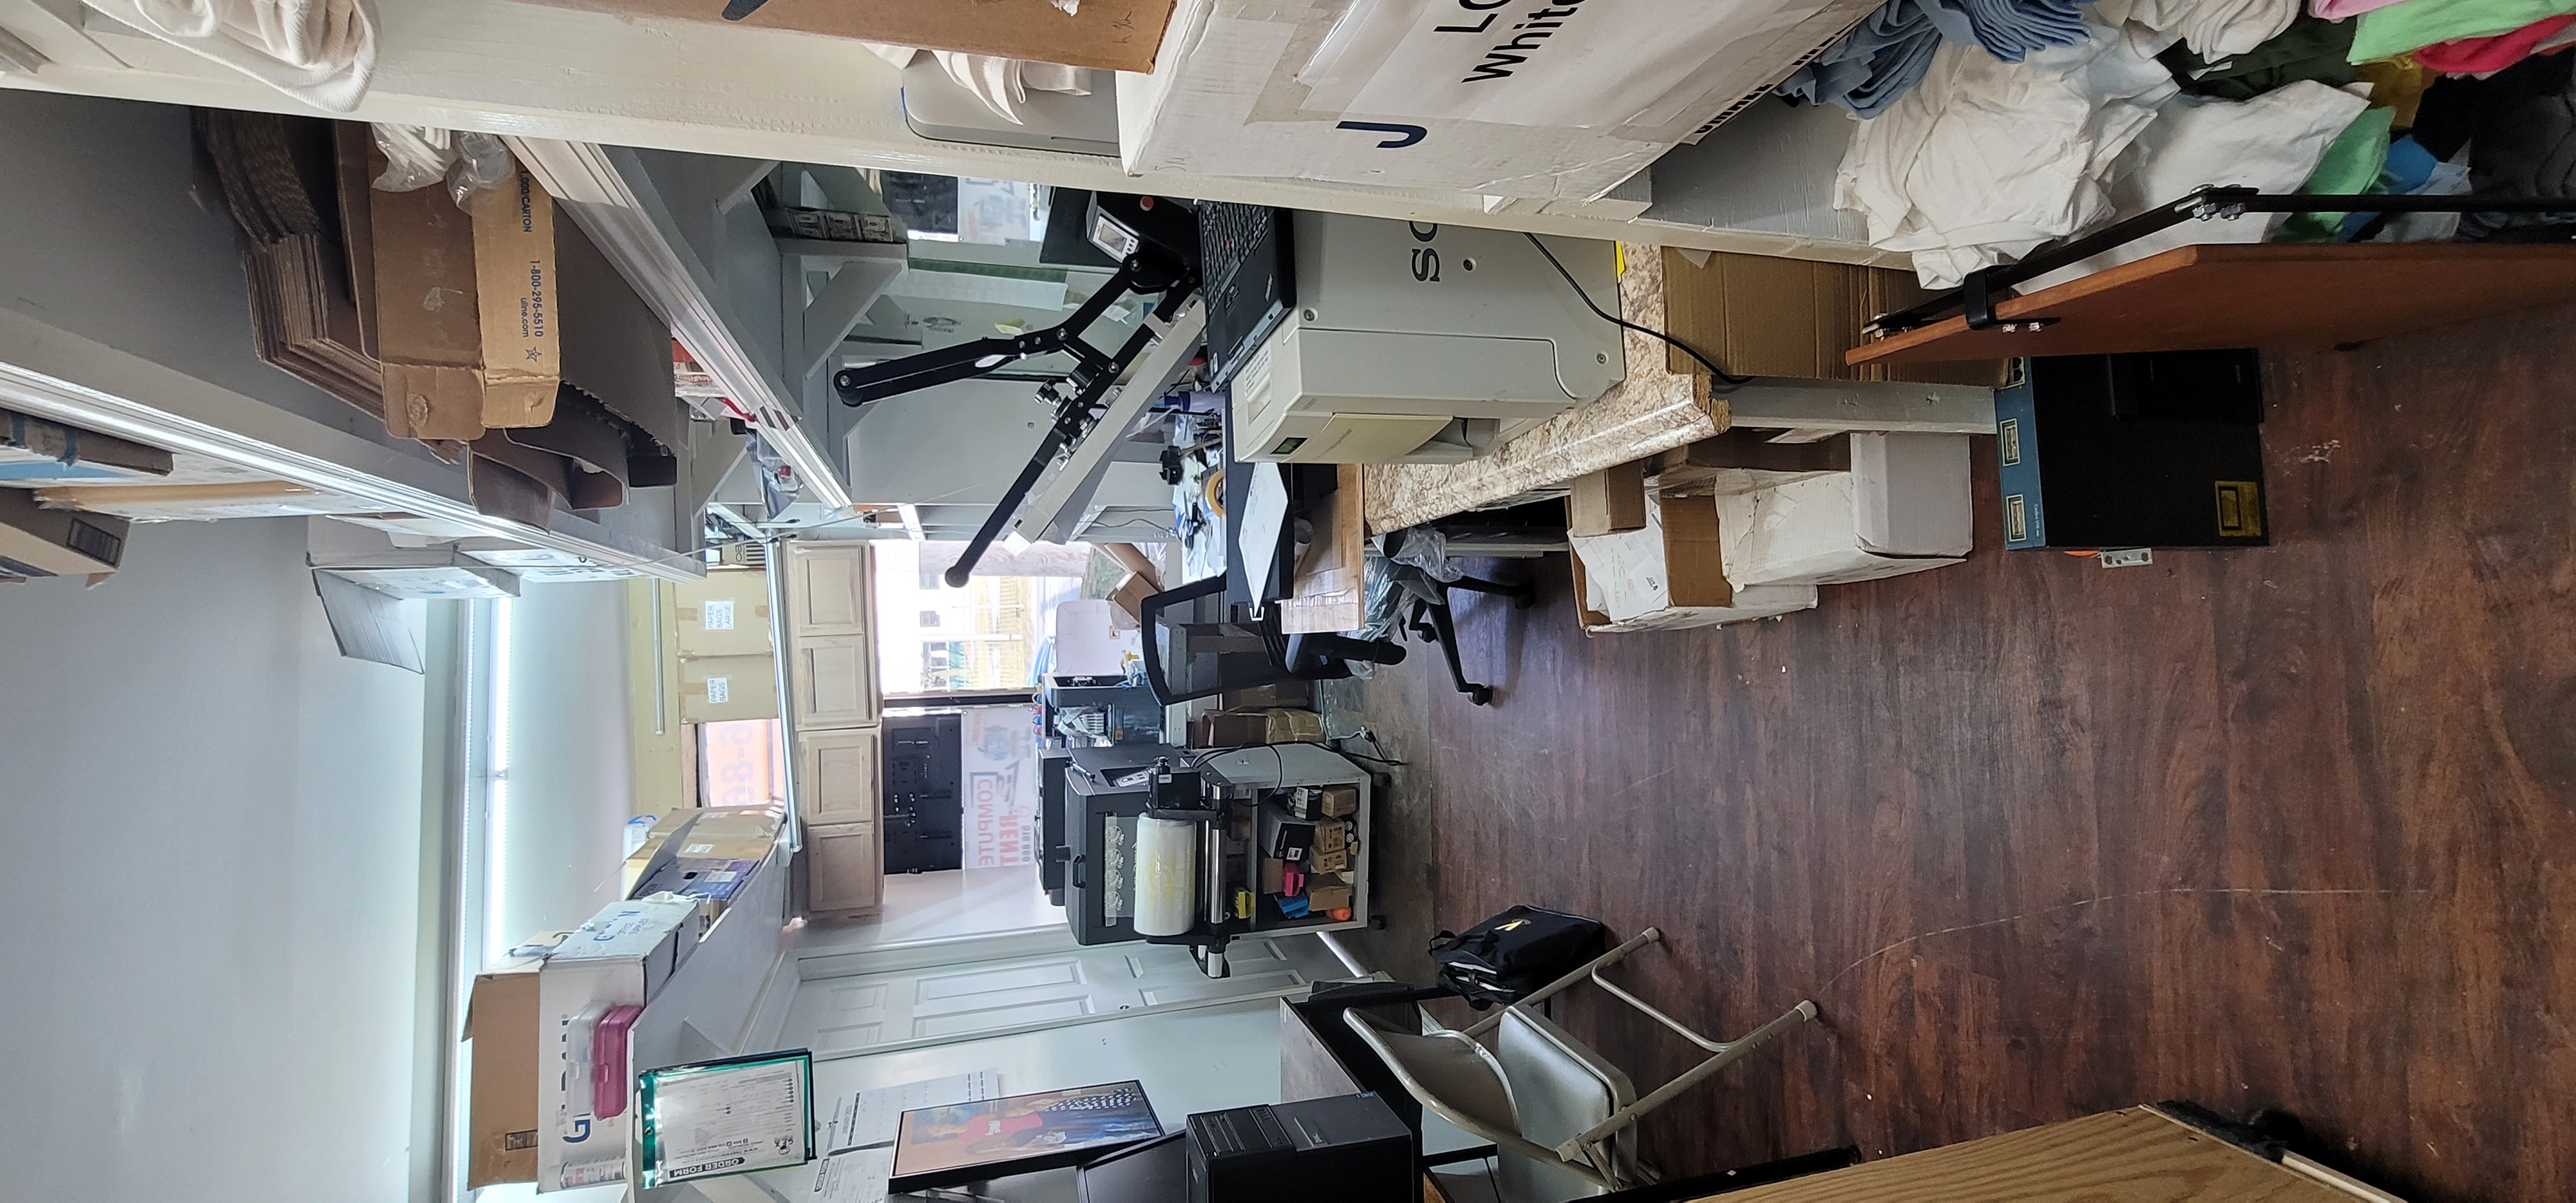 Screen Printing Business For Sale in Nassau County